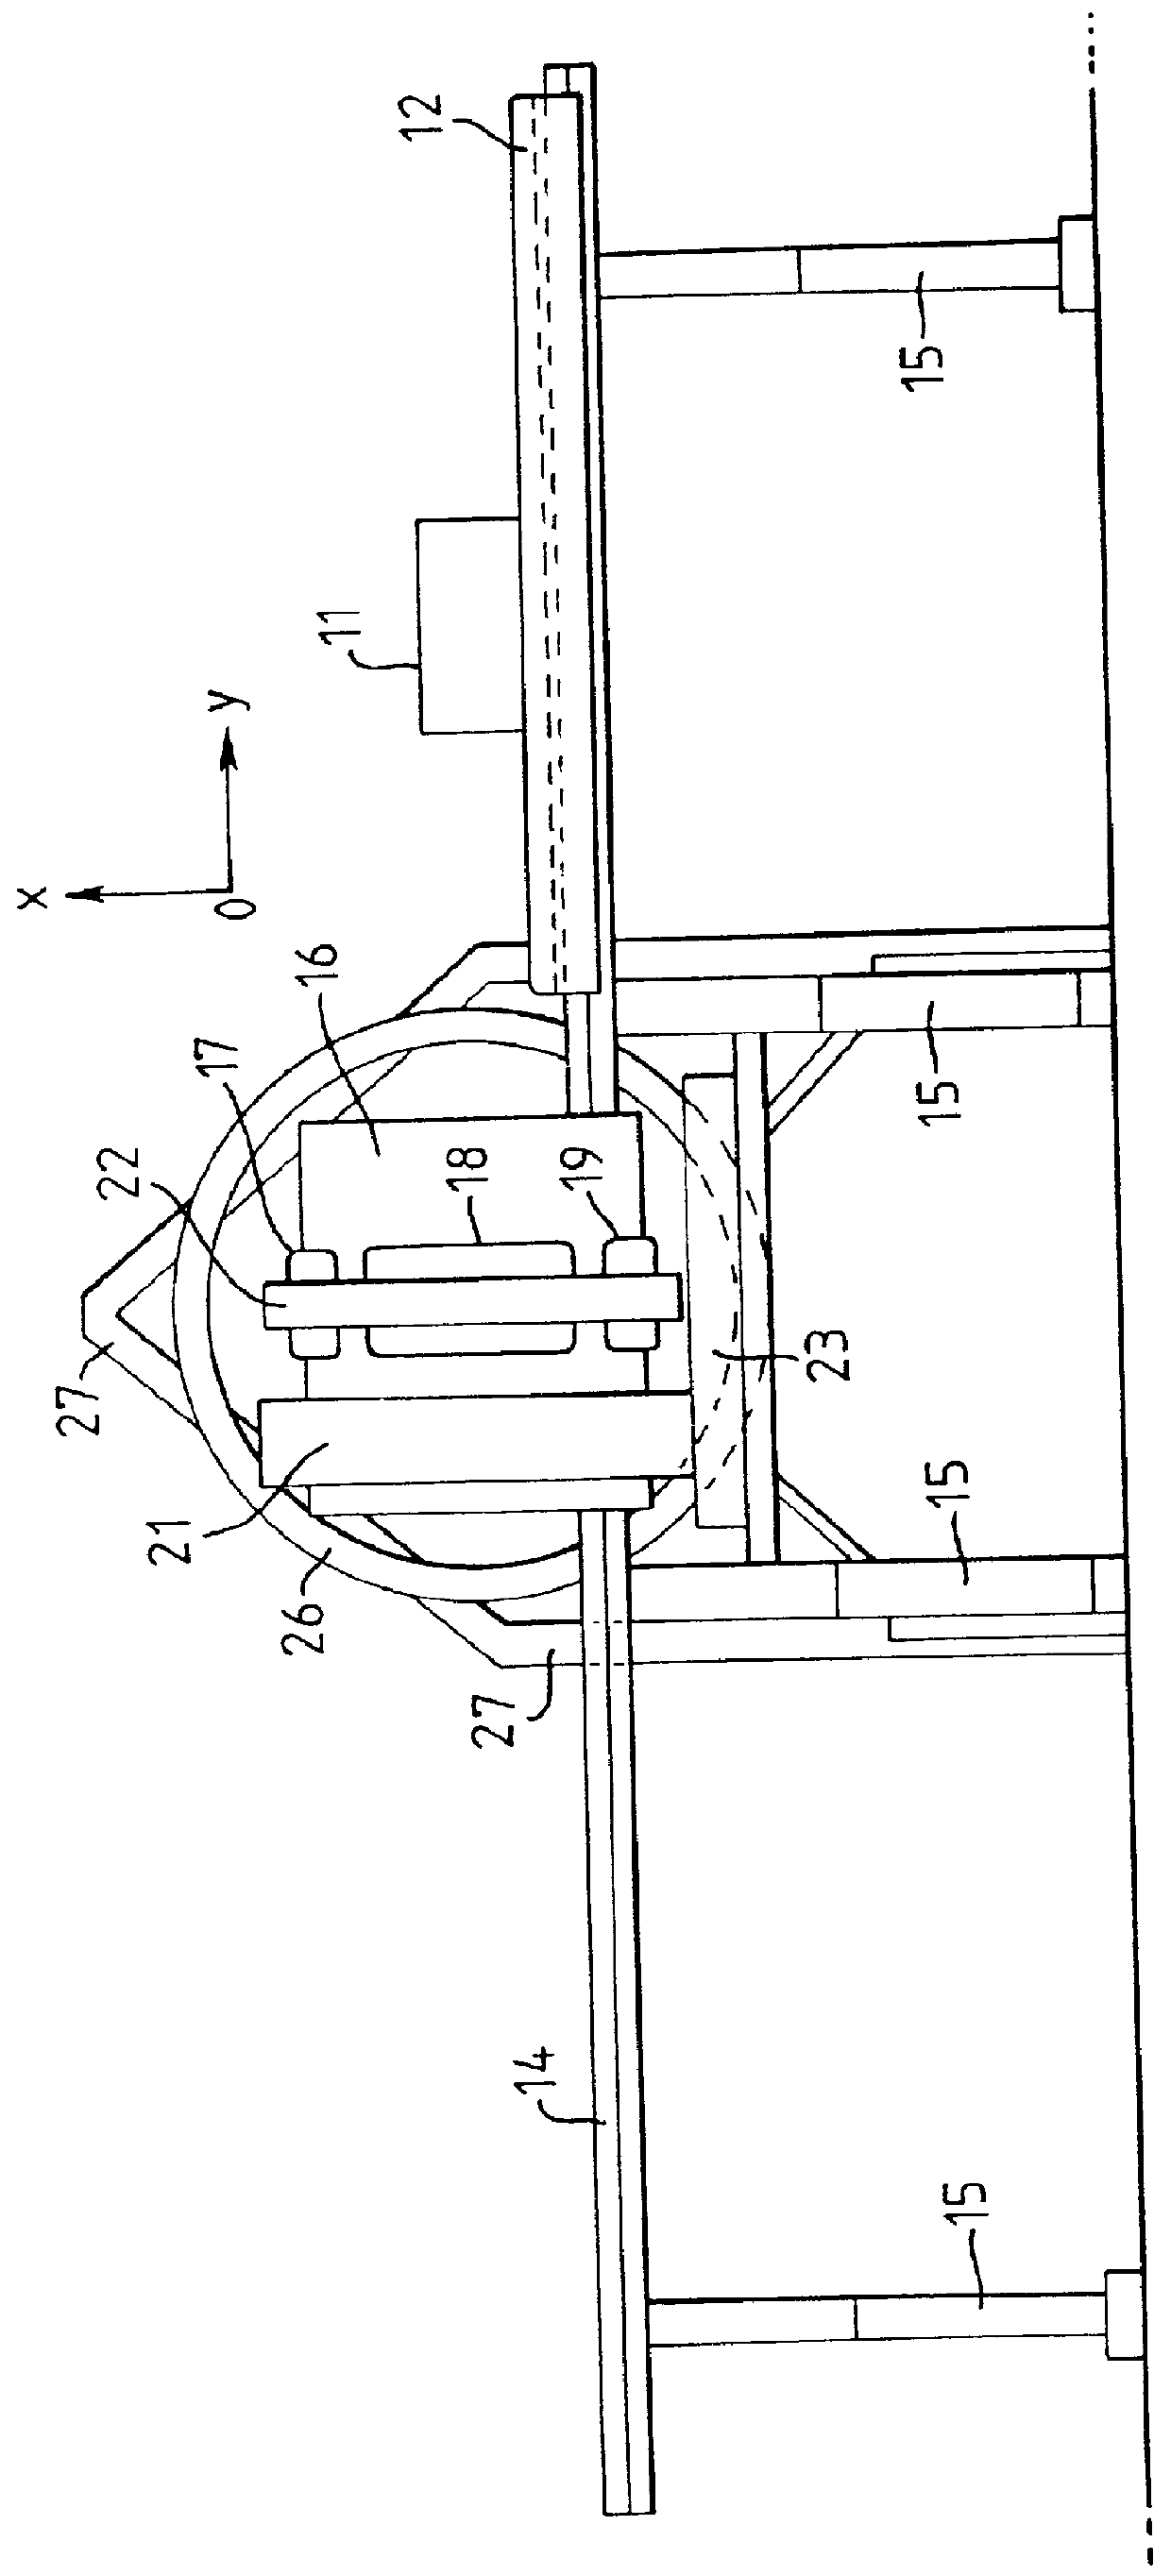 Methods and apparatus for NQR testing